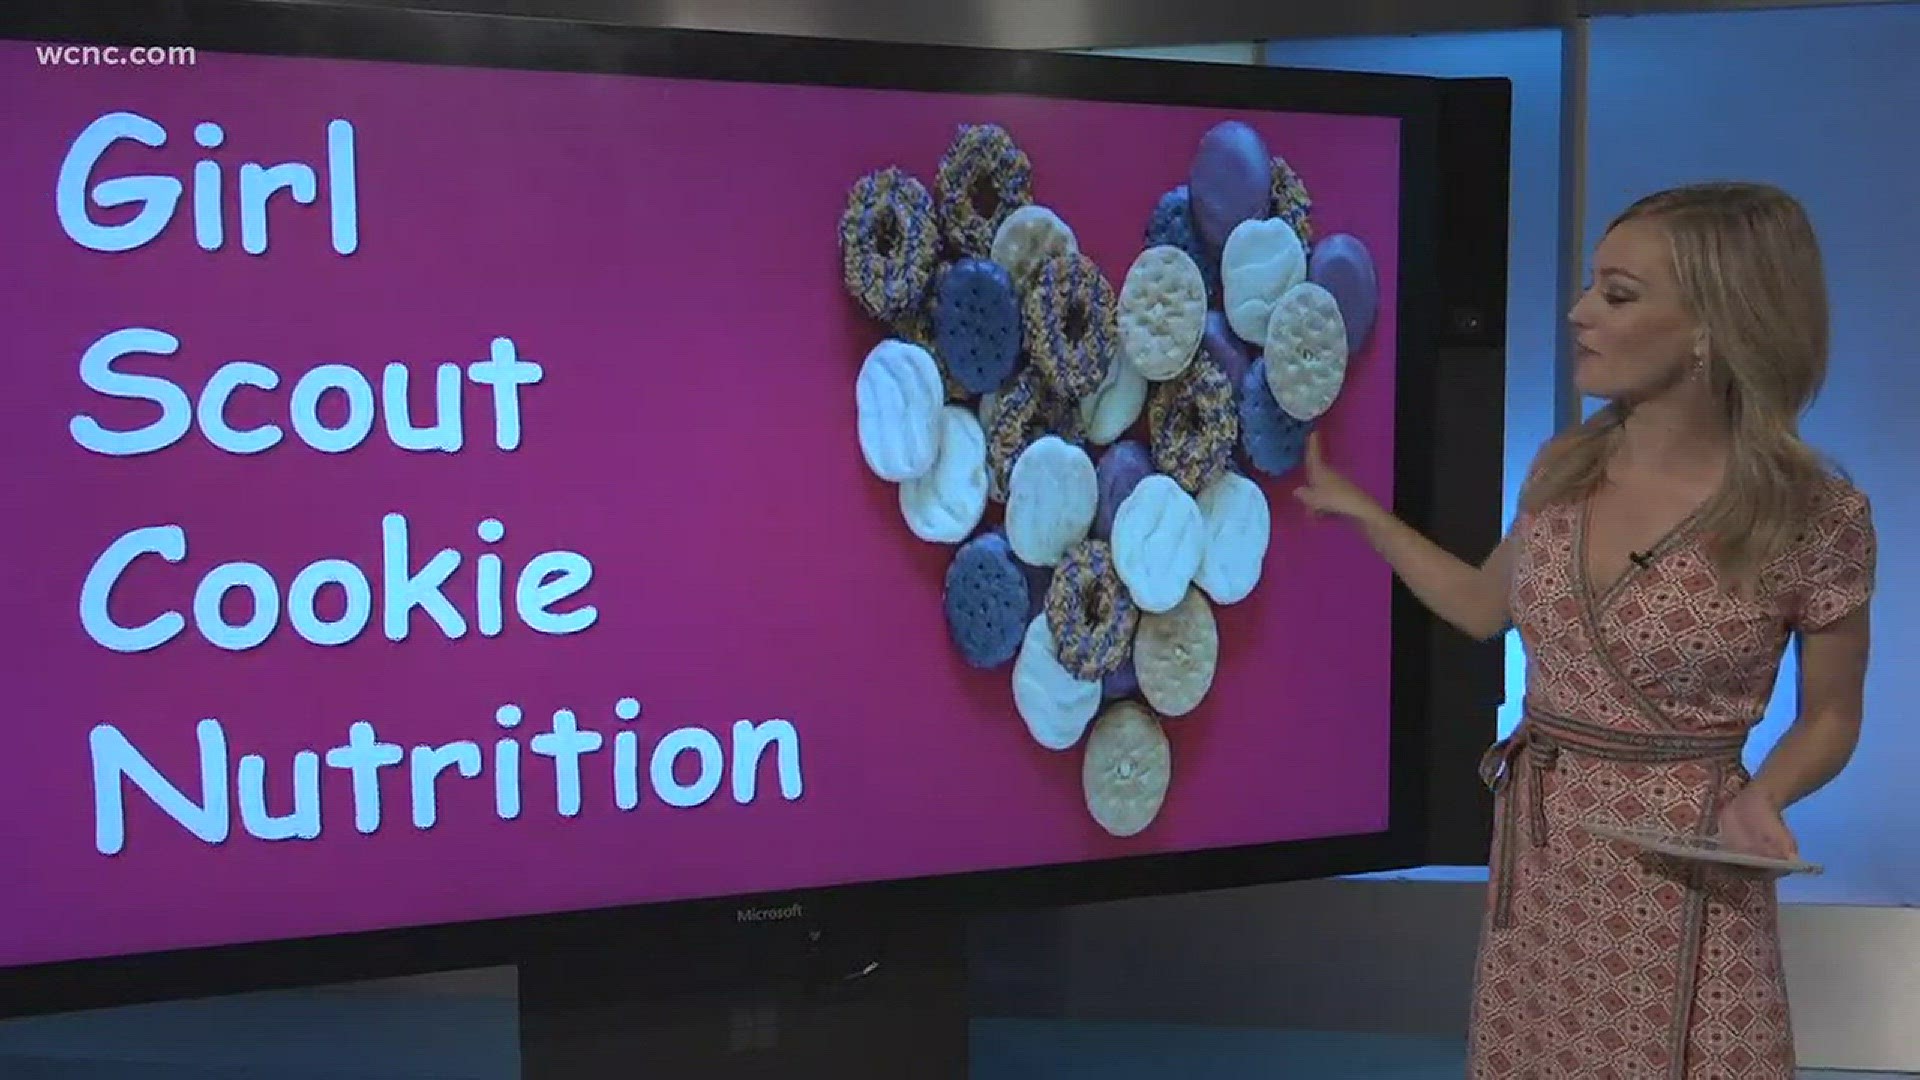 We're right in the middle of Girl Scout Cookie season. But just how bad are the delicious snacks for your health?